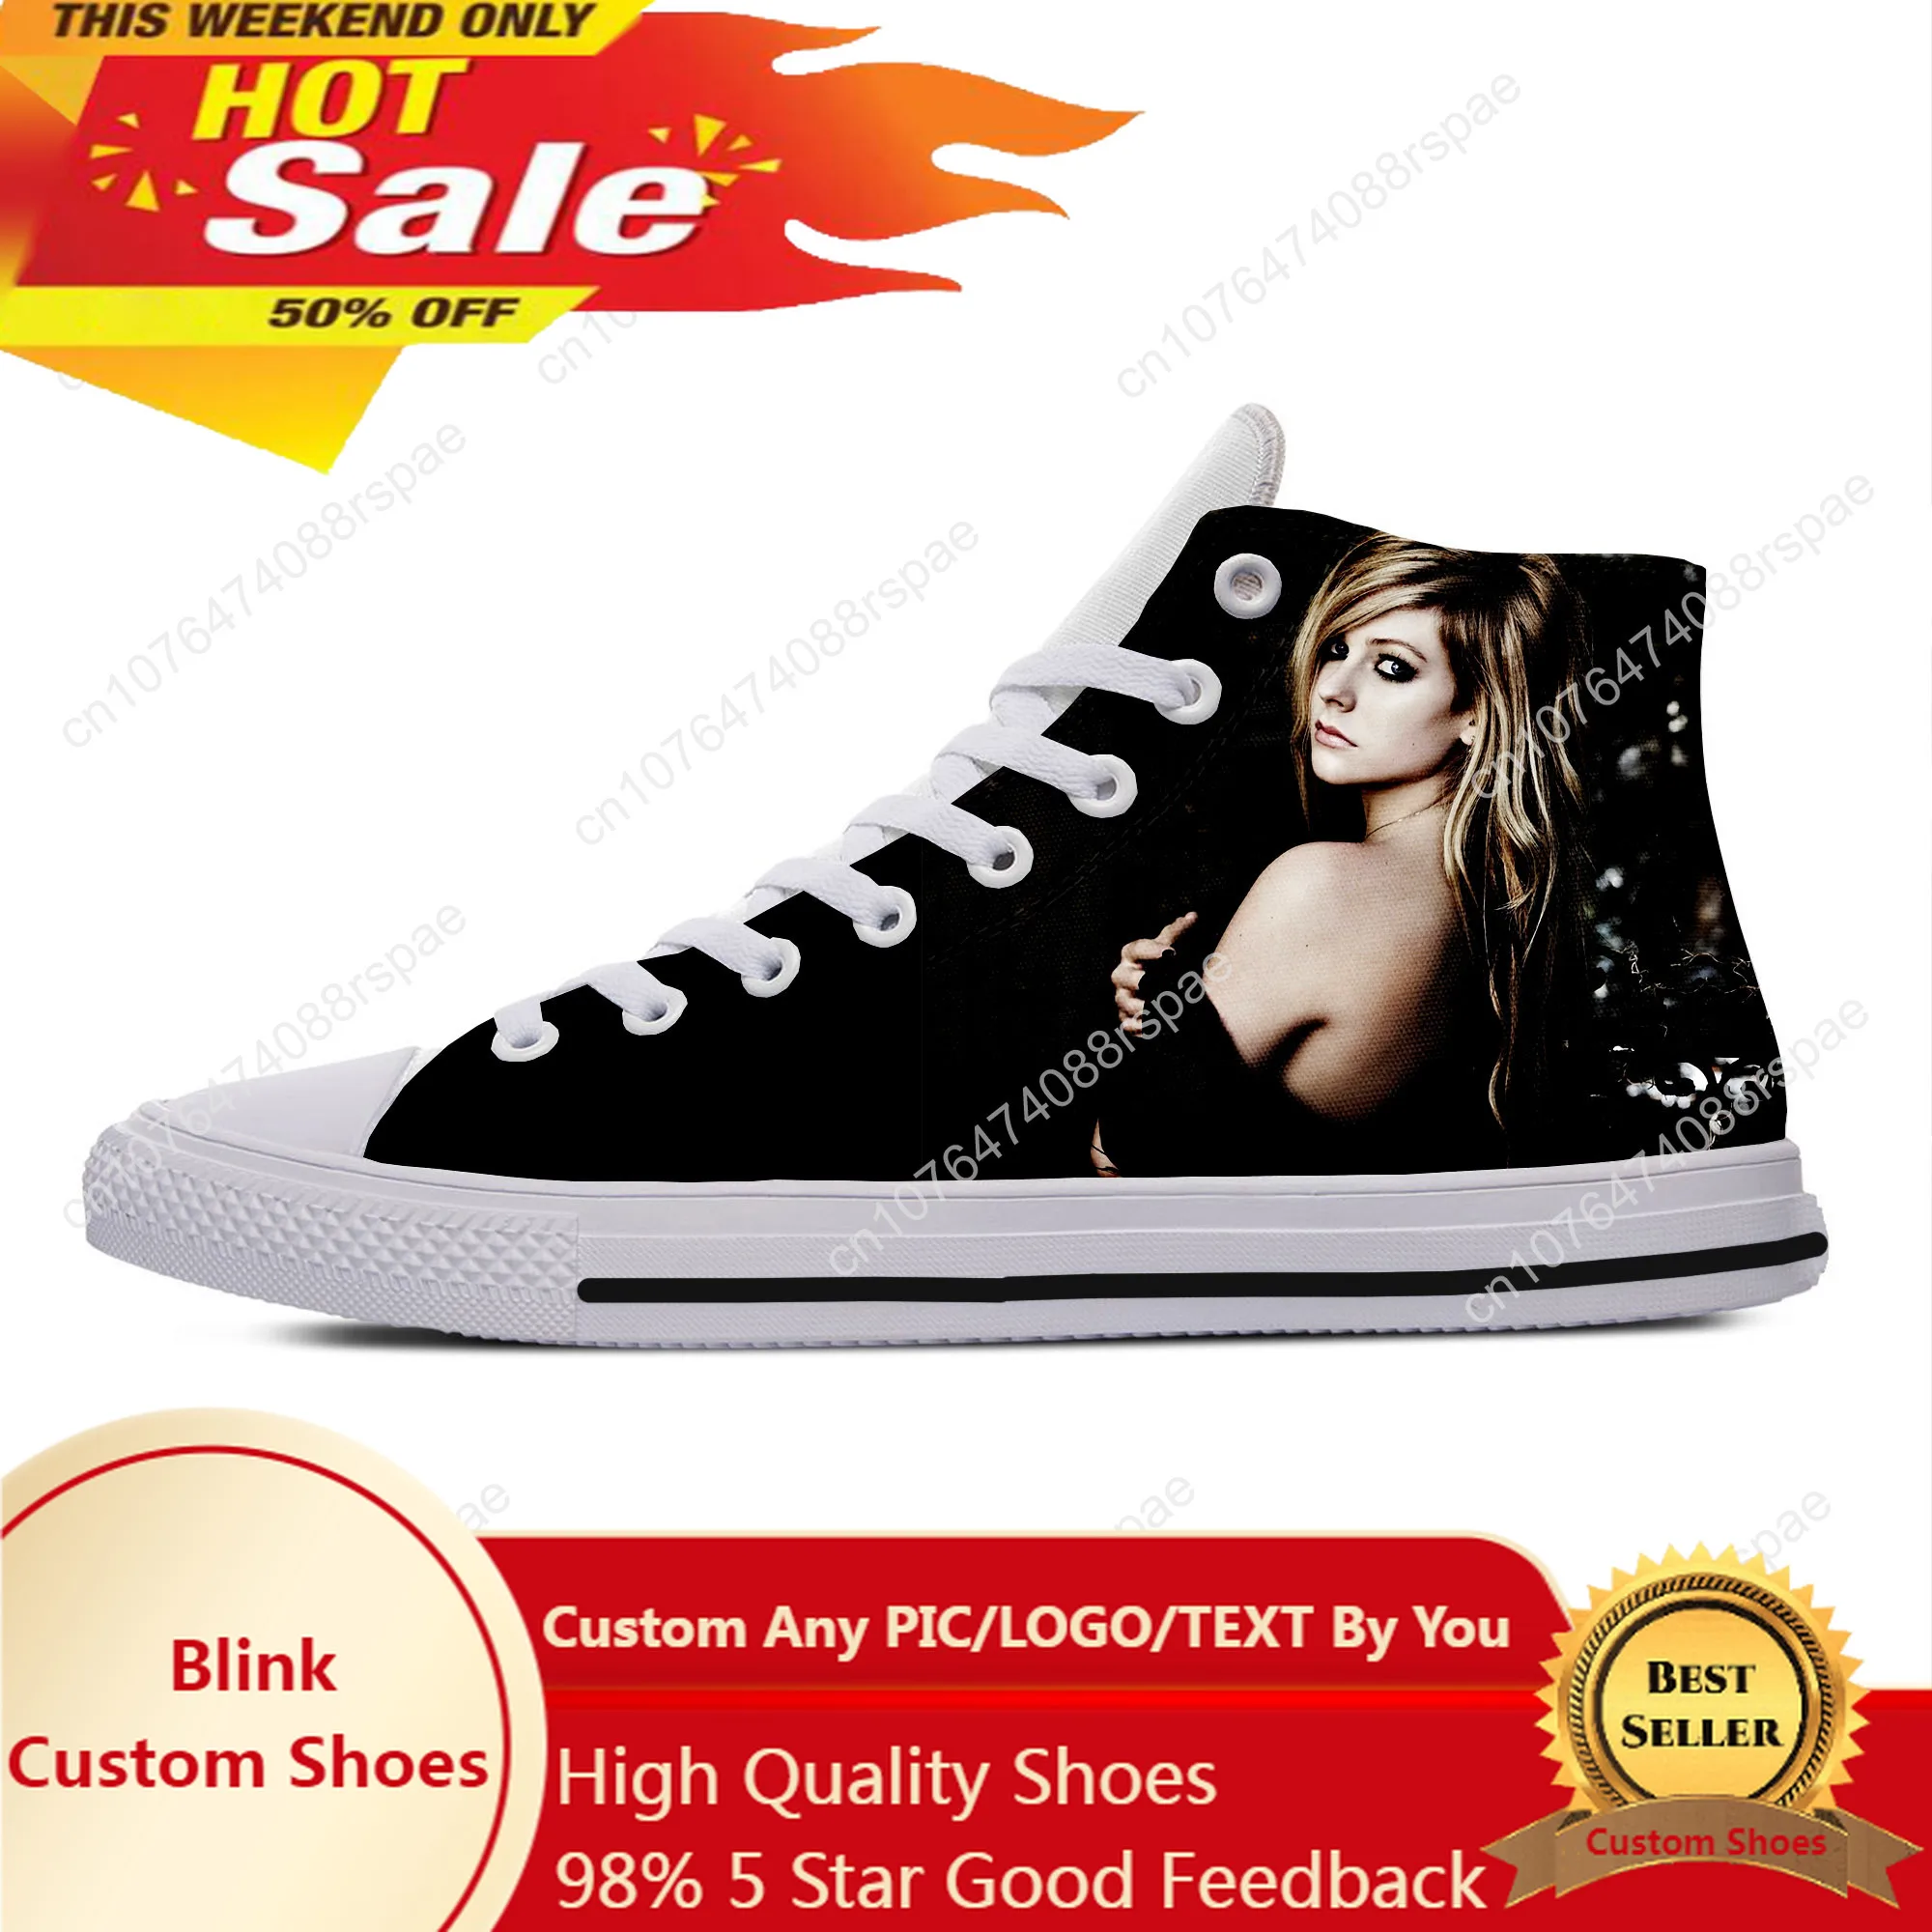 

Hot Cool Summer Fashion Avril Lavigne High Sneakers Menwomen High Quality High Help Casual Shoes Classic Latest Board Shoes